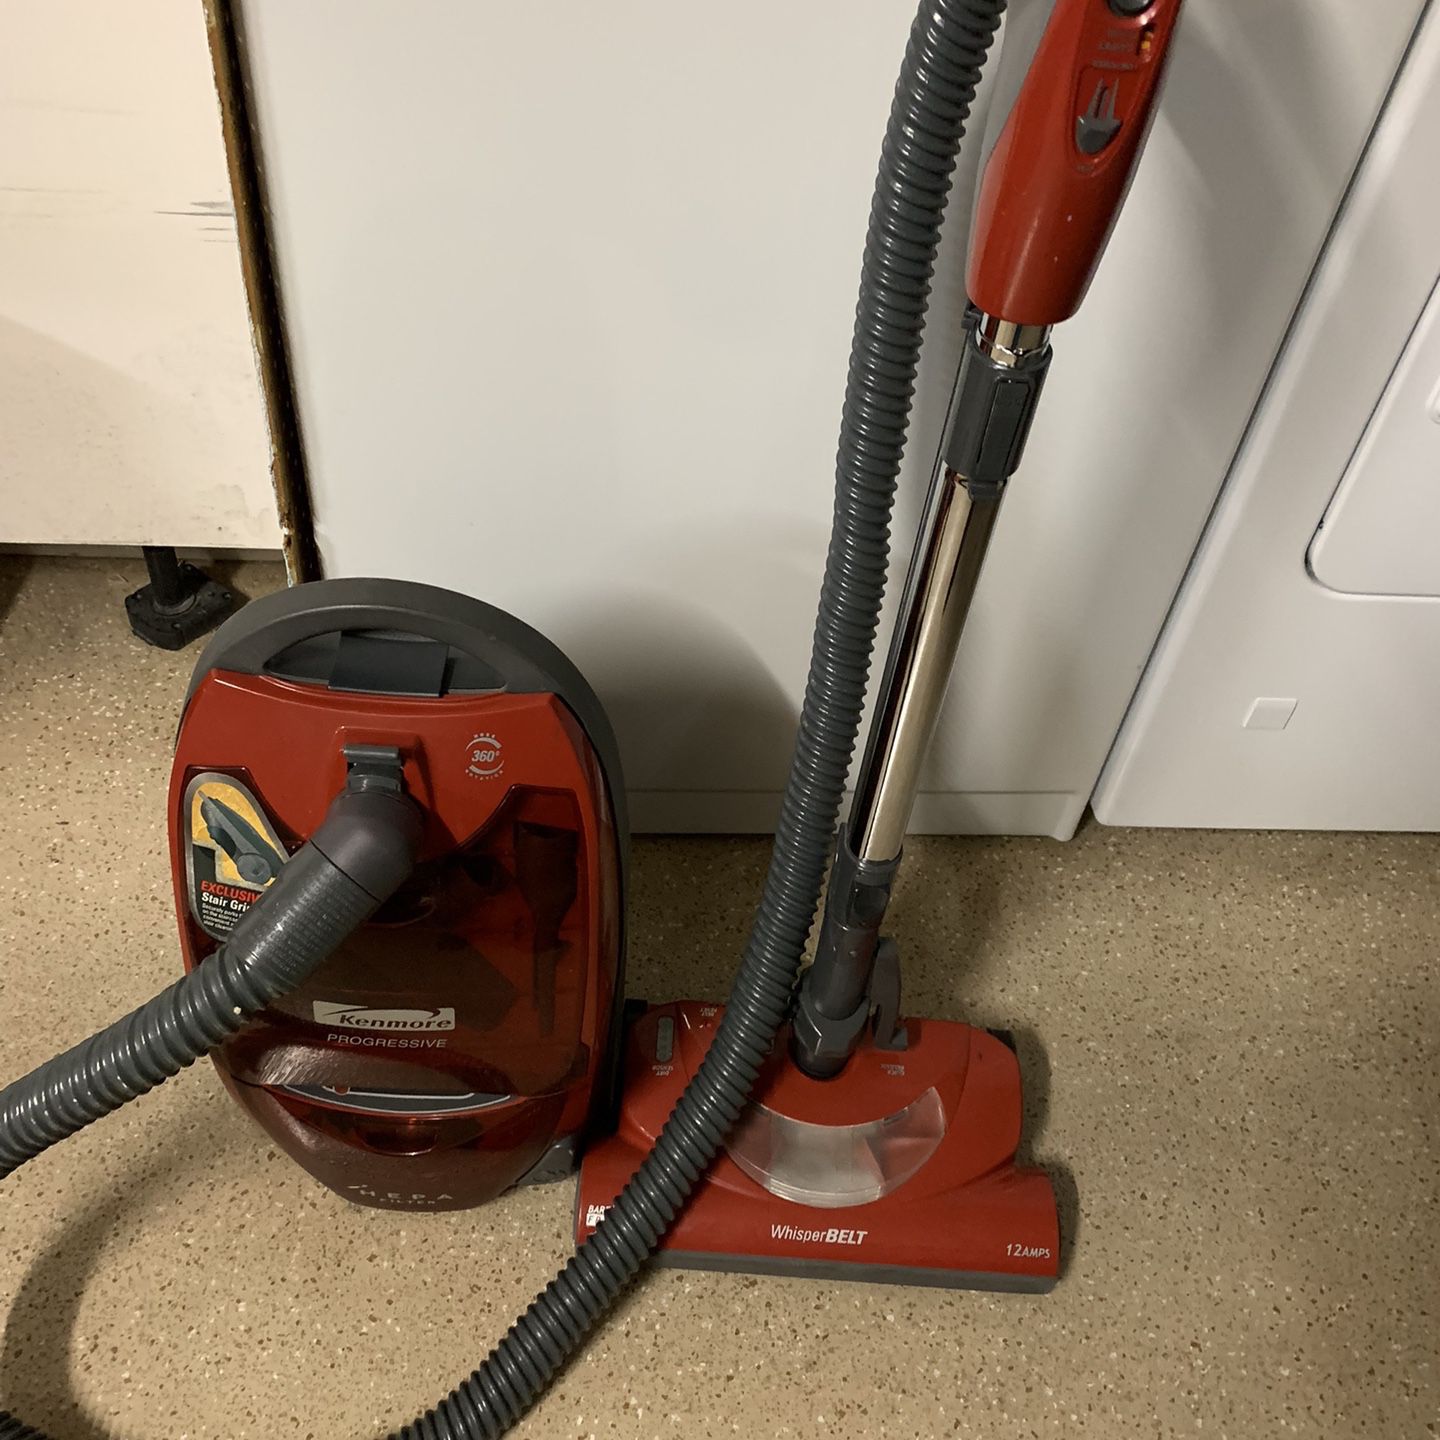 Kenmore Progessive Canister Vacuum  Works Great!